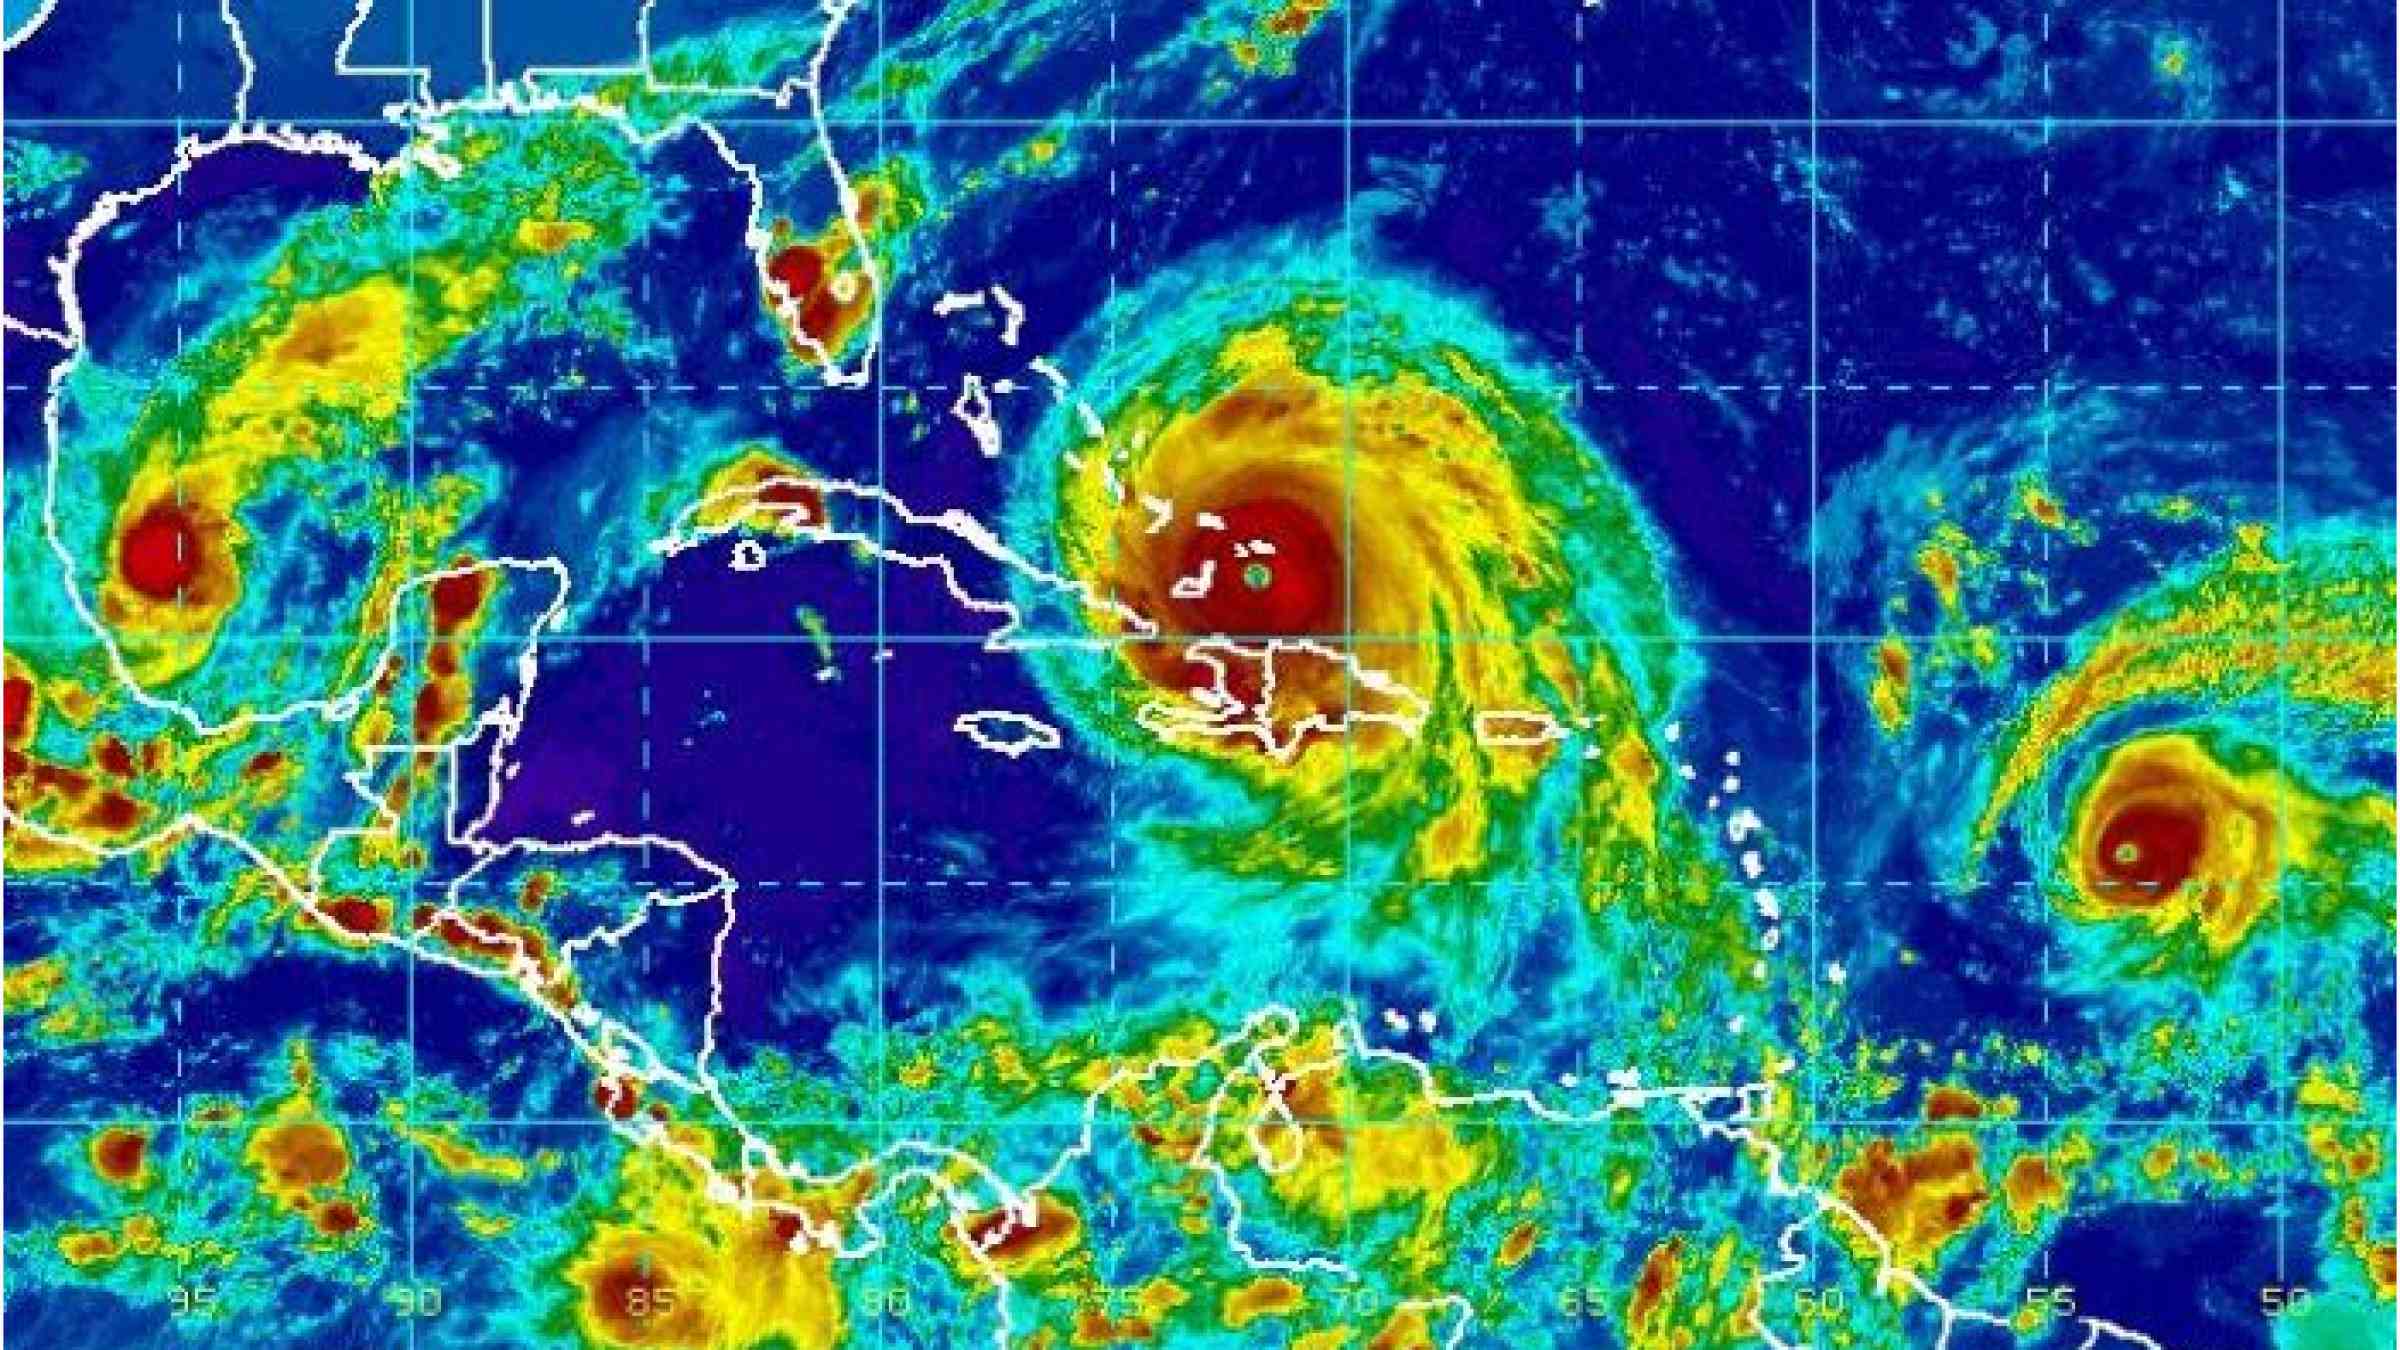 About 49 million people are directly in Hurricane Irma’s projected path, including more than 10.5 million children. Hurricanes Katia and Jose are also life-threatening.